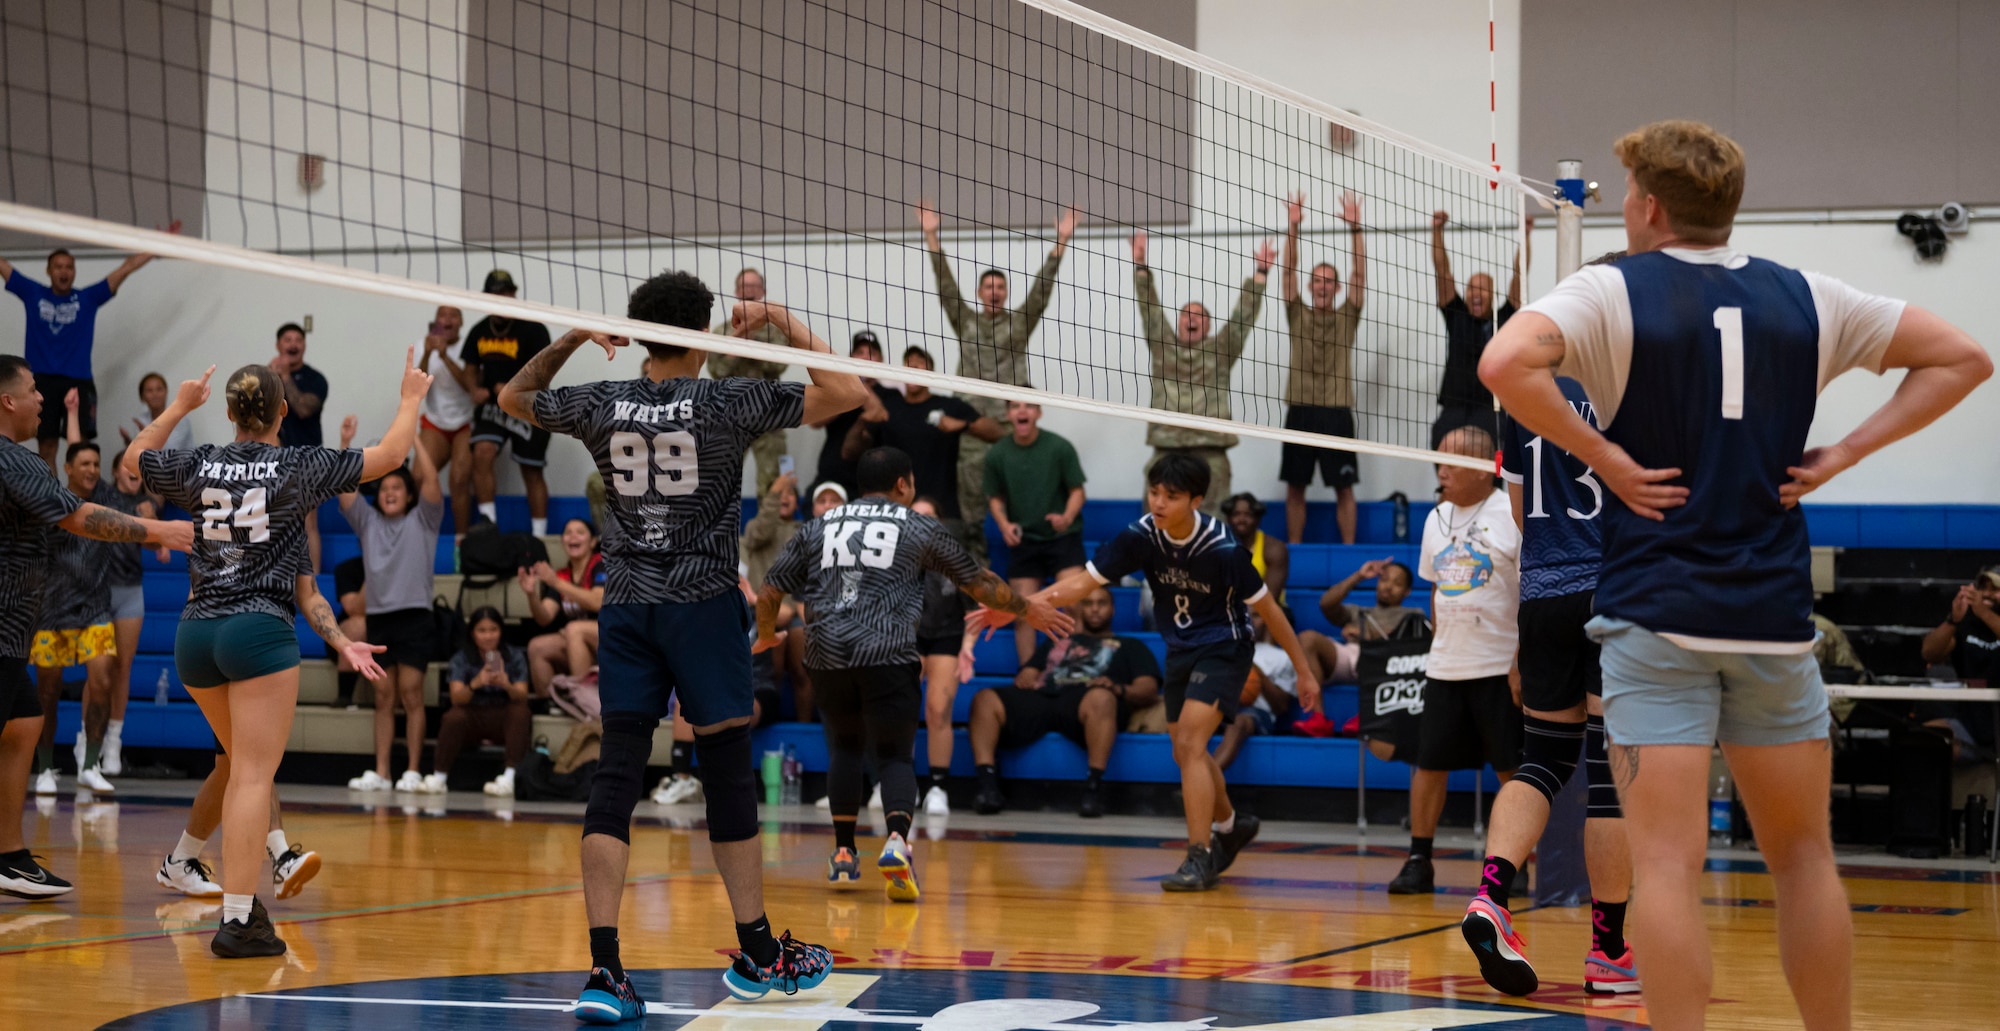 Members of the Security Forces Squadron’s intramural volleyball team celebrate during the championship game on Andersen Air Force Base, Guam, Oct. 26, 2023. Andersen’s intramural volleyball league ended in a climactic final game between the Security Forces Squadron and CES. The game ended with SFS being named the champions. (U.S. Air Force photo by Airman 1st Class Spencer Perkins)